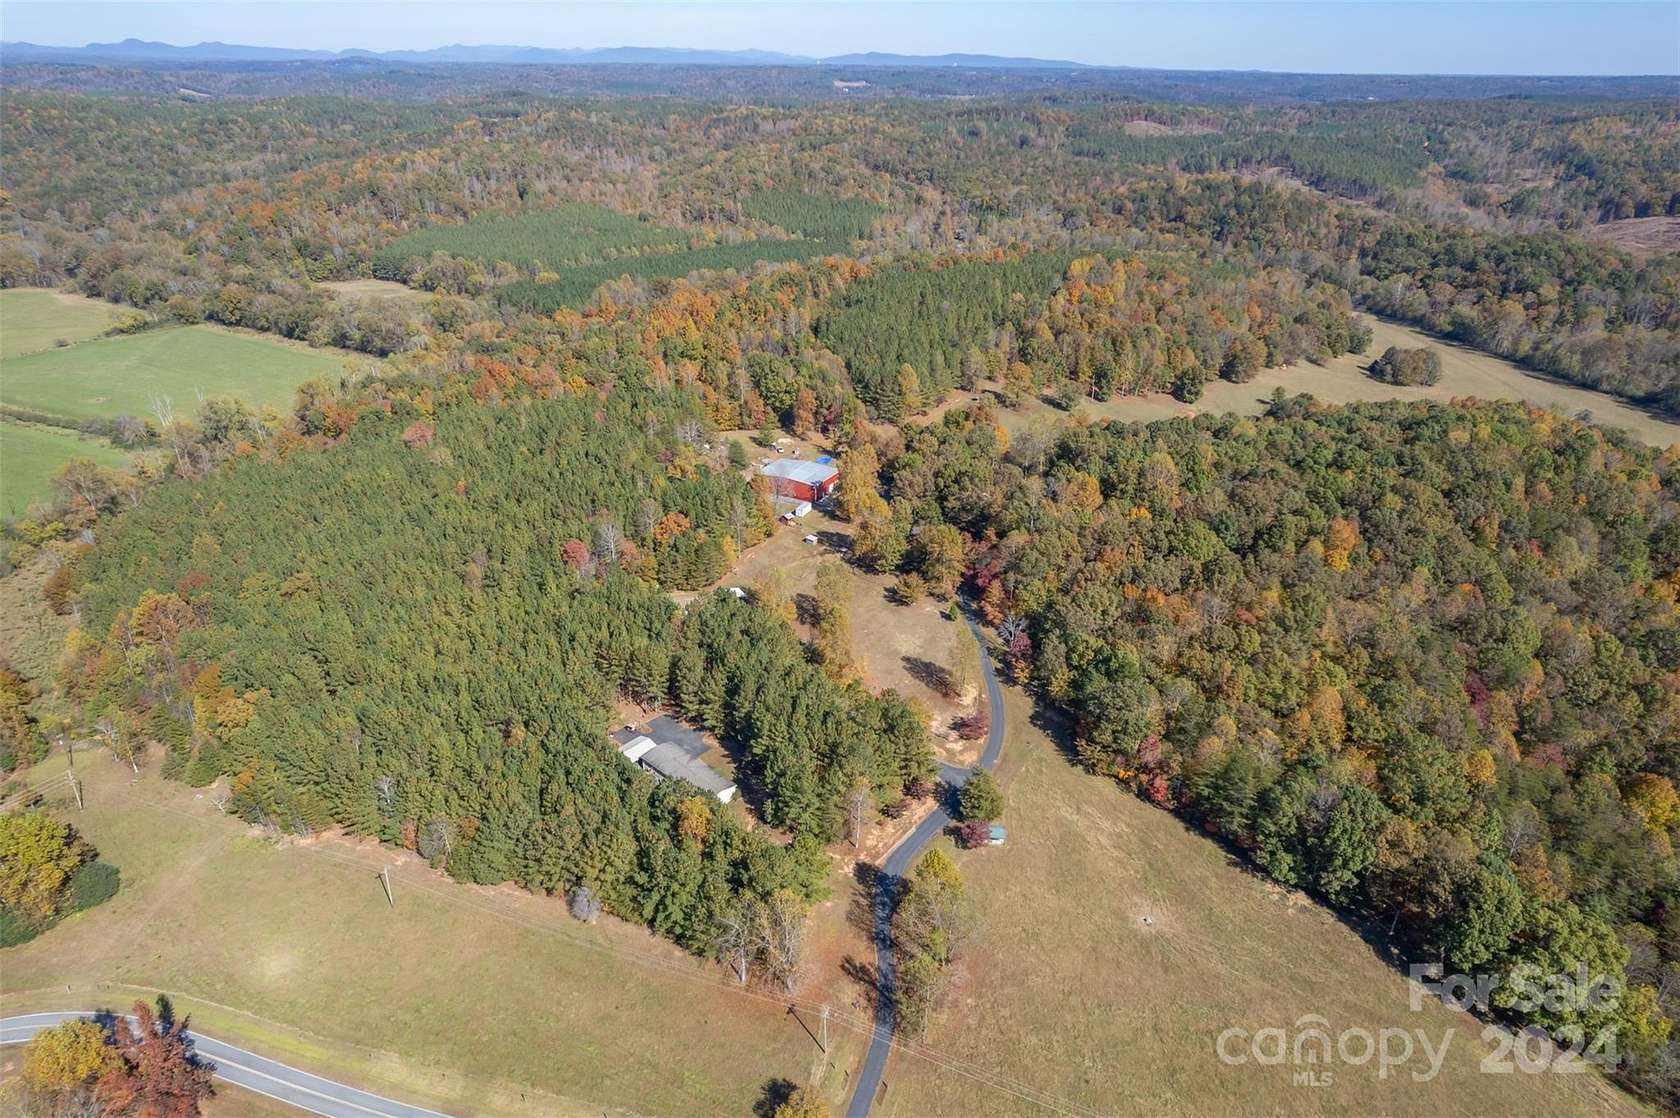 173 Acres of Agricultural Land with Home for Sale in Rutherfordton, North Carolina